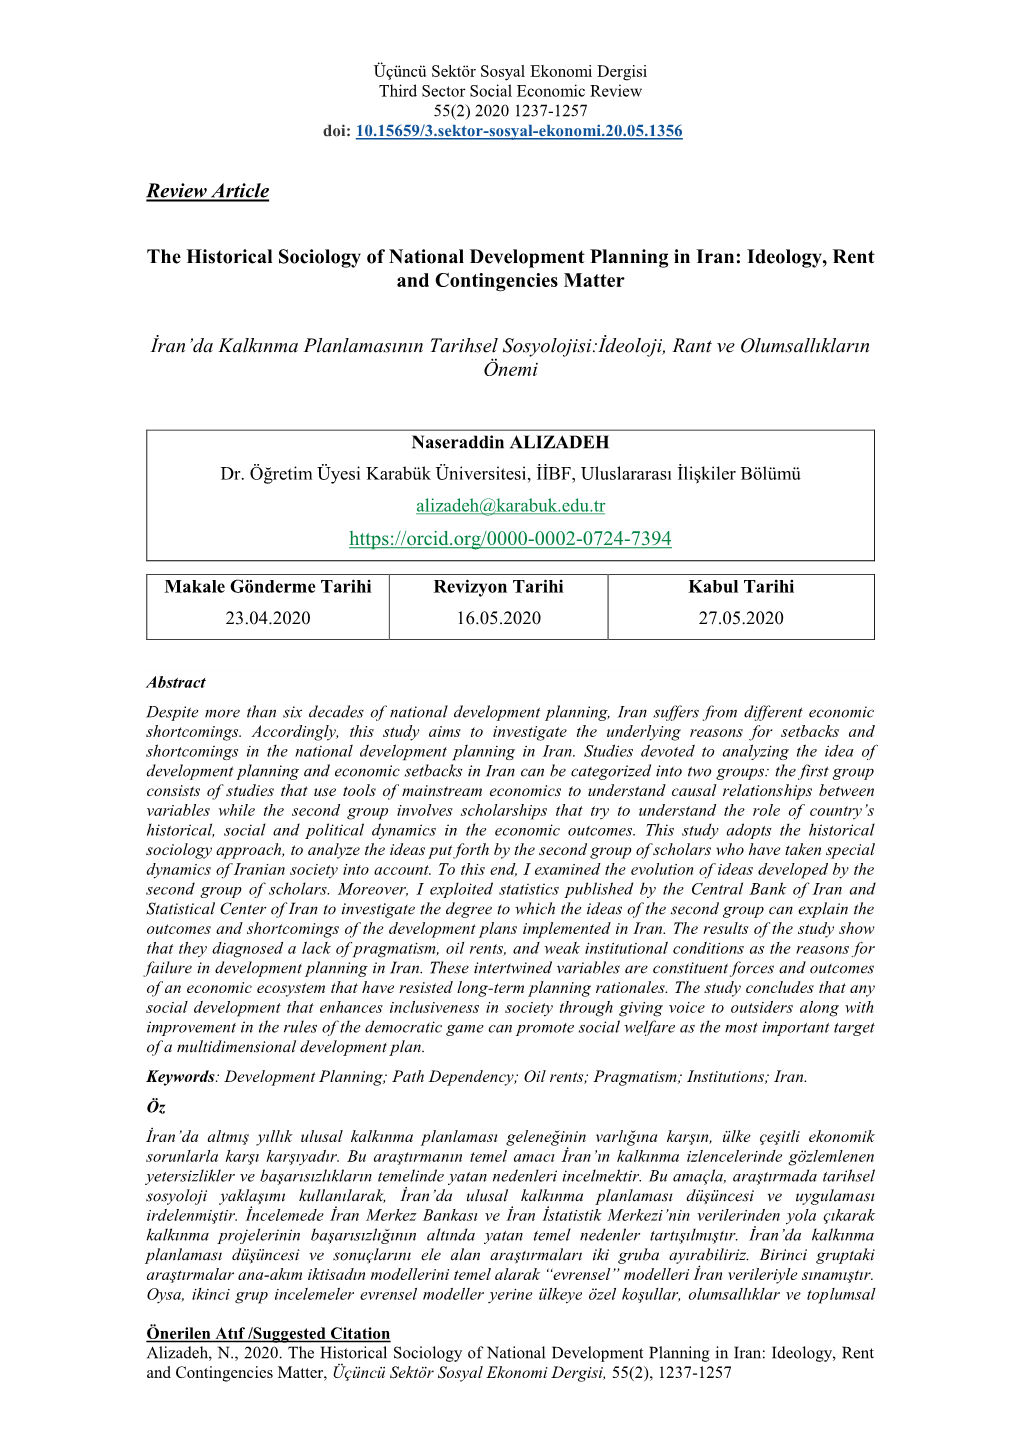 Review Article the Historical Sociology Of